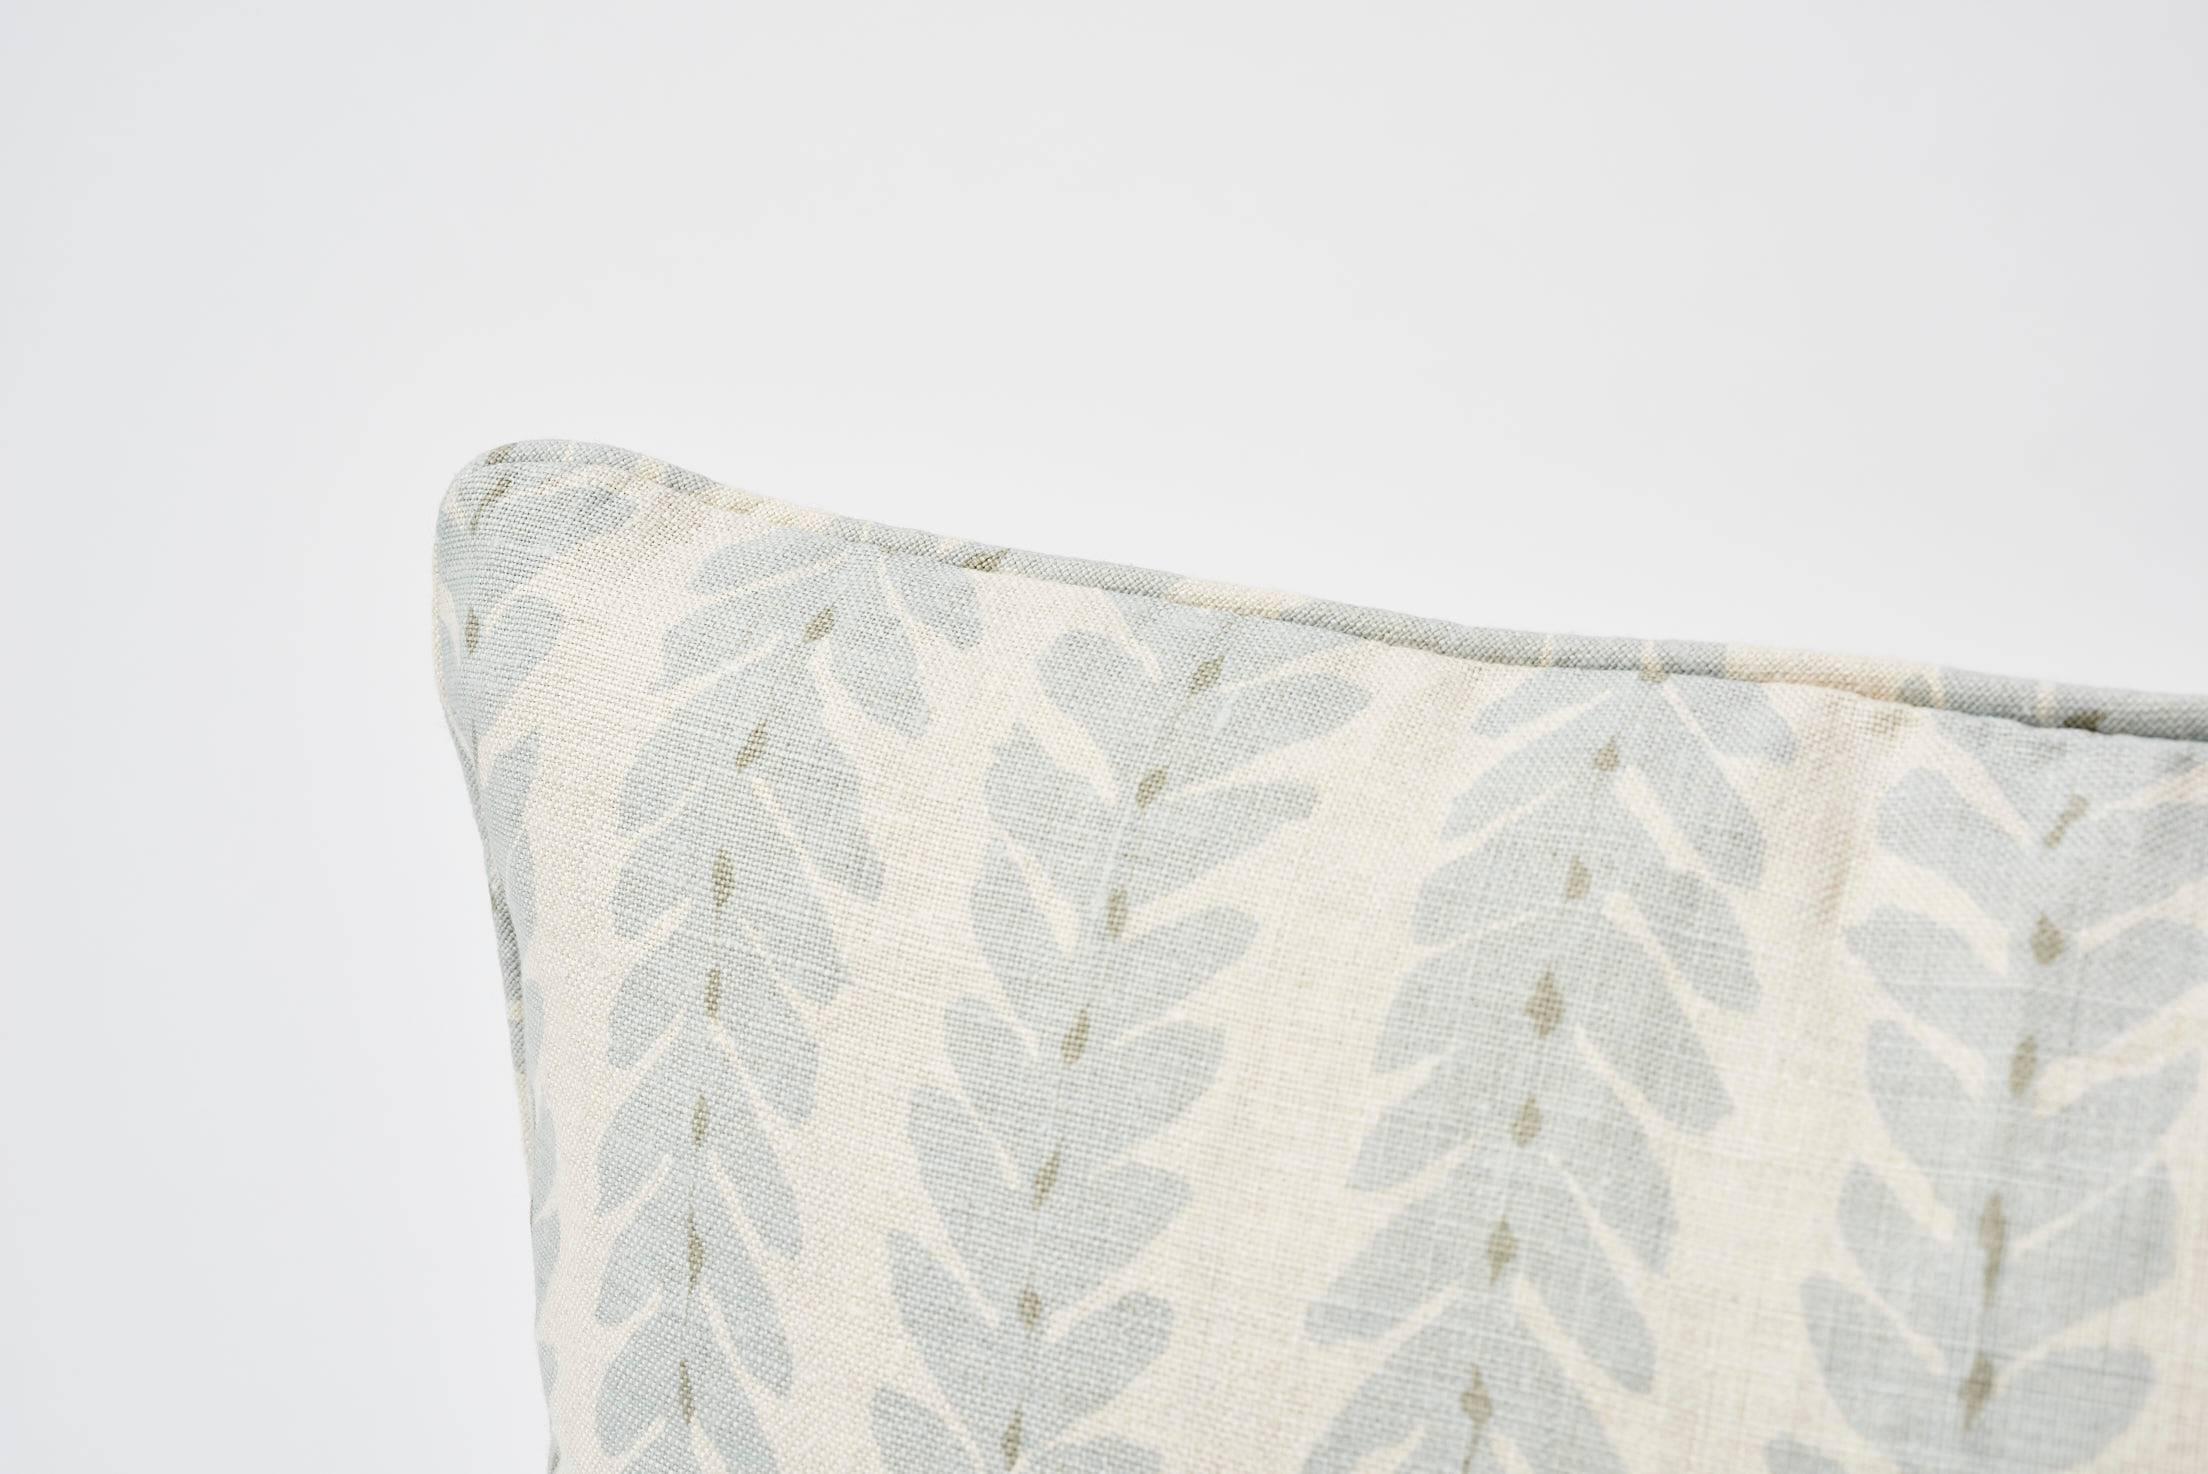 Classic yet modern, in collaboration with Veere Grenney, Woodperry is an updated take on a botanical stripe. Woven in England, the natural linen ground gives this leafy hand-blocked pattern subtlety and depth. Featured as a decorative accent, this